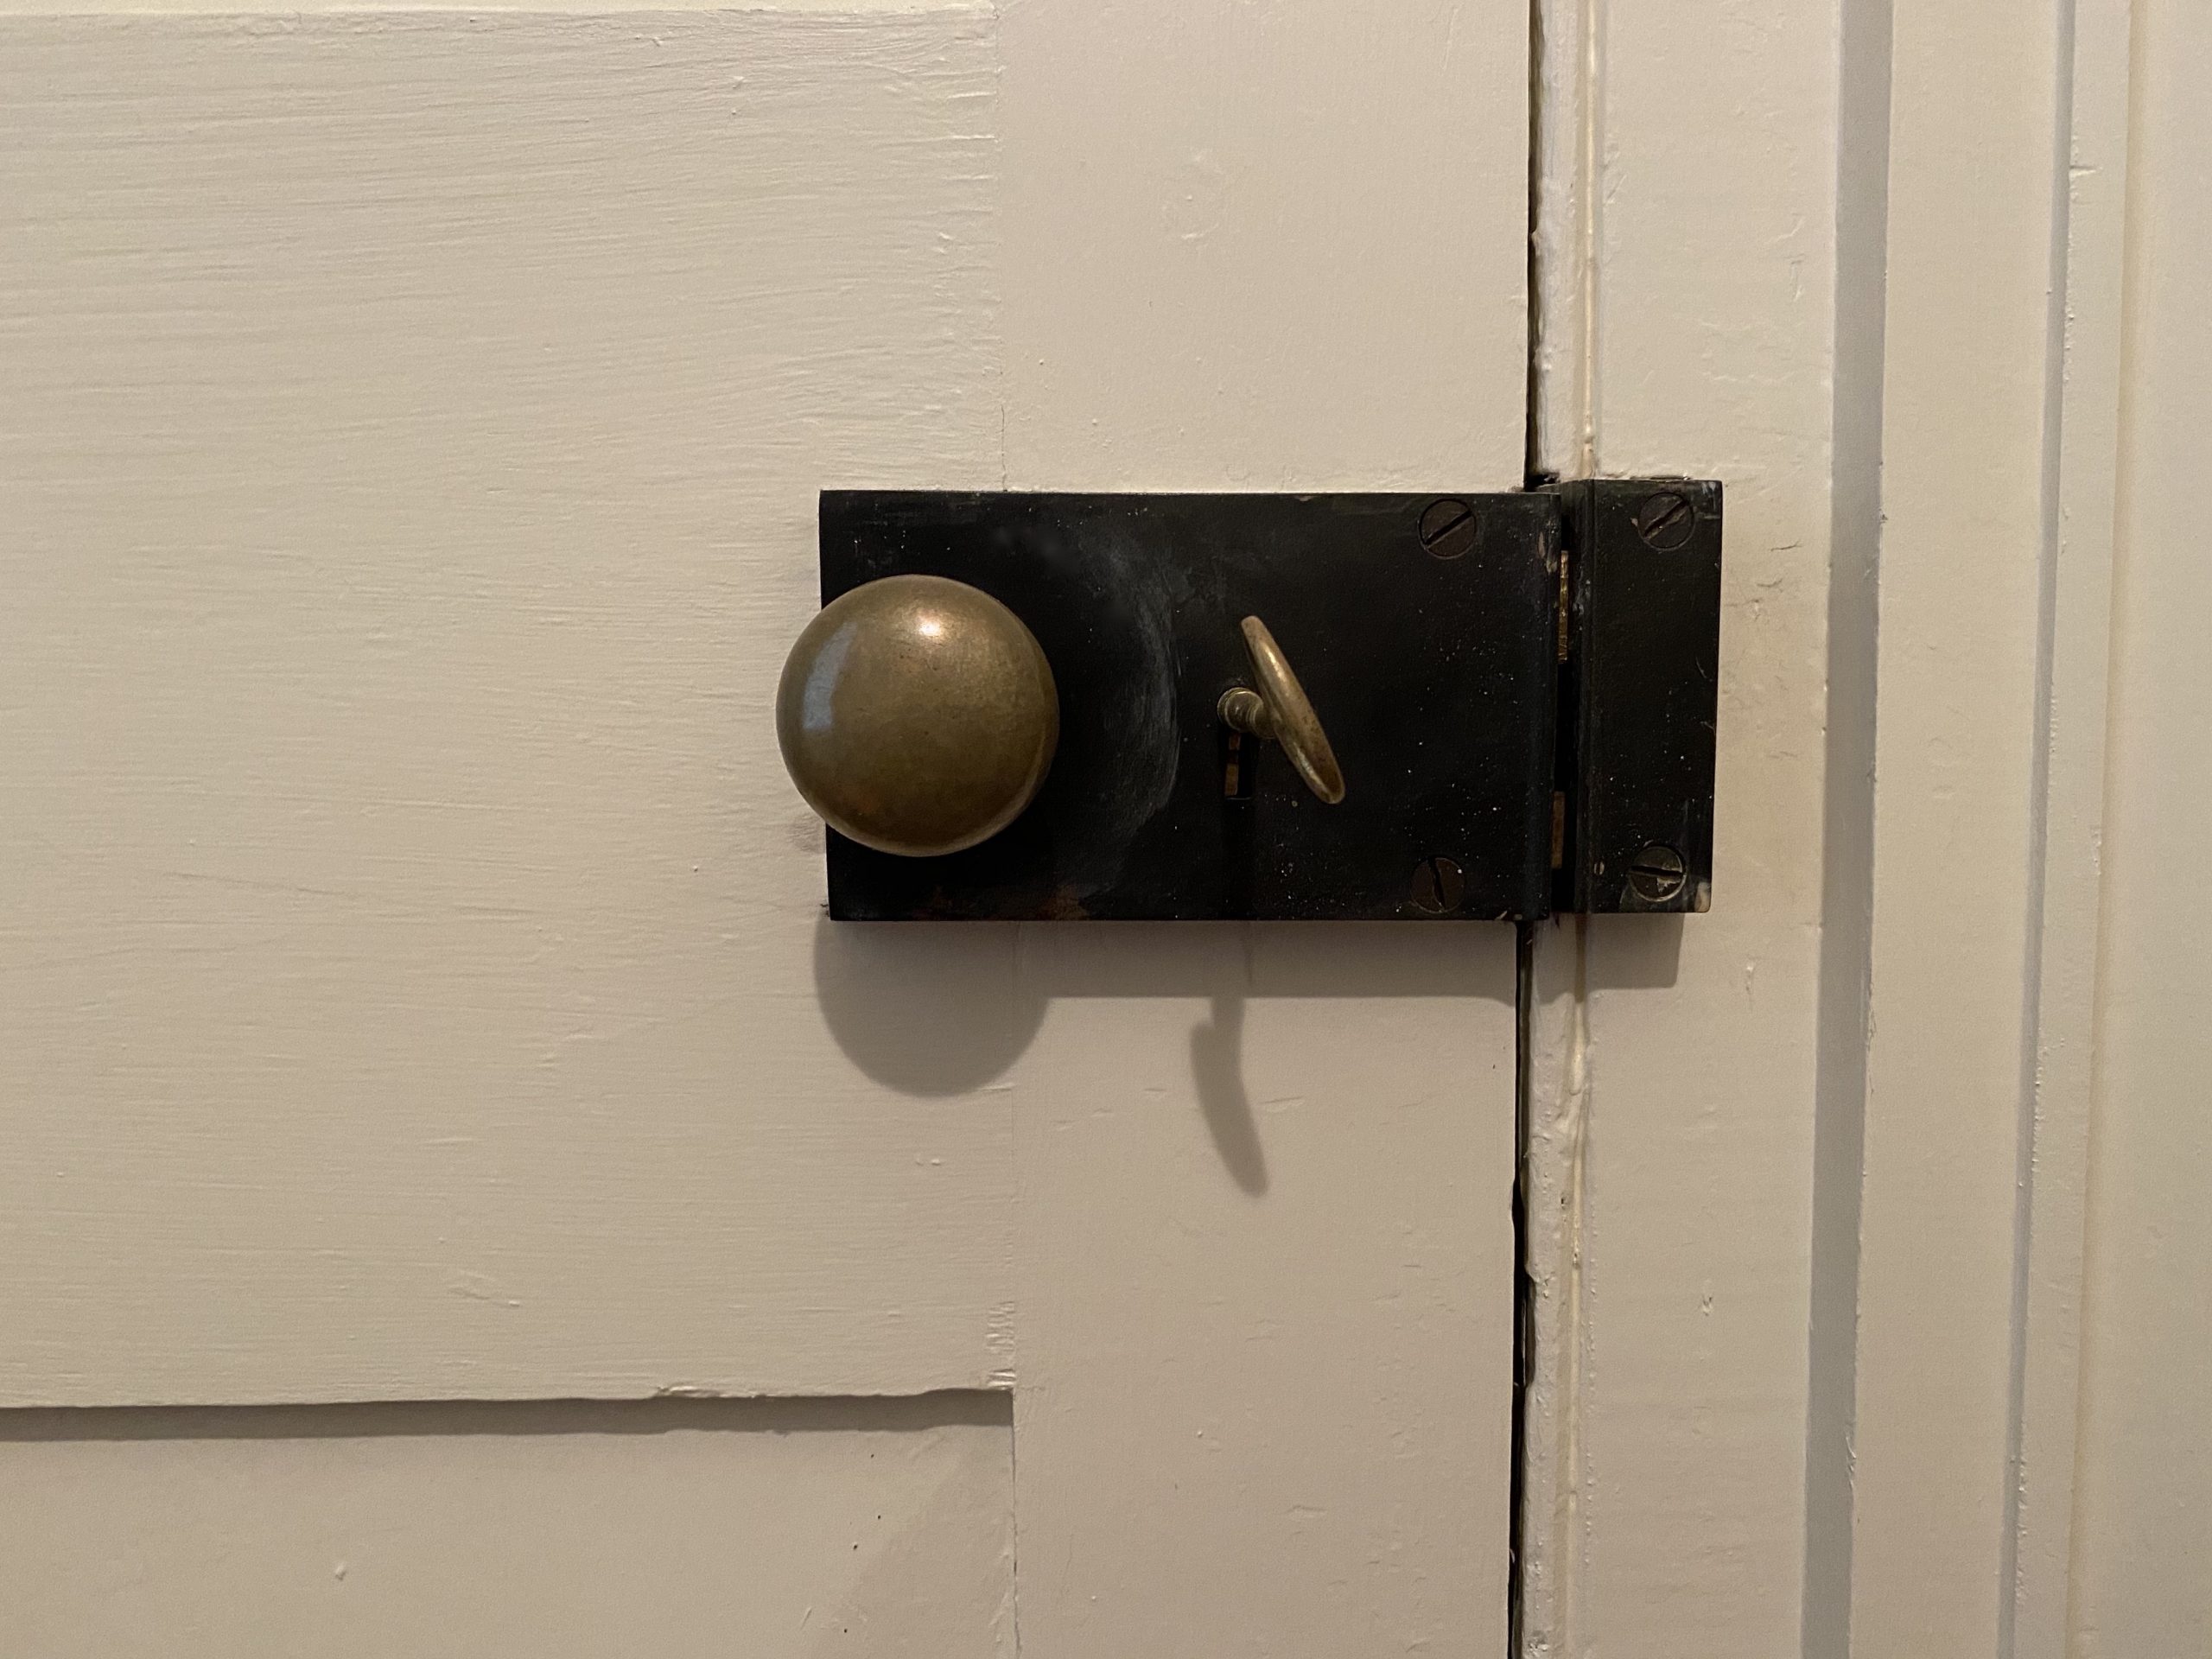  Brass is naturally germicidal and antimicrobial, making it a perfect choice for doorknobs and other frequently touched surfaces. 